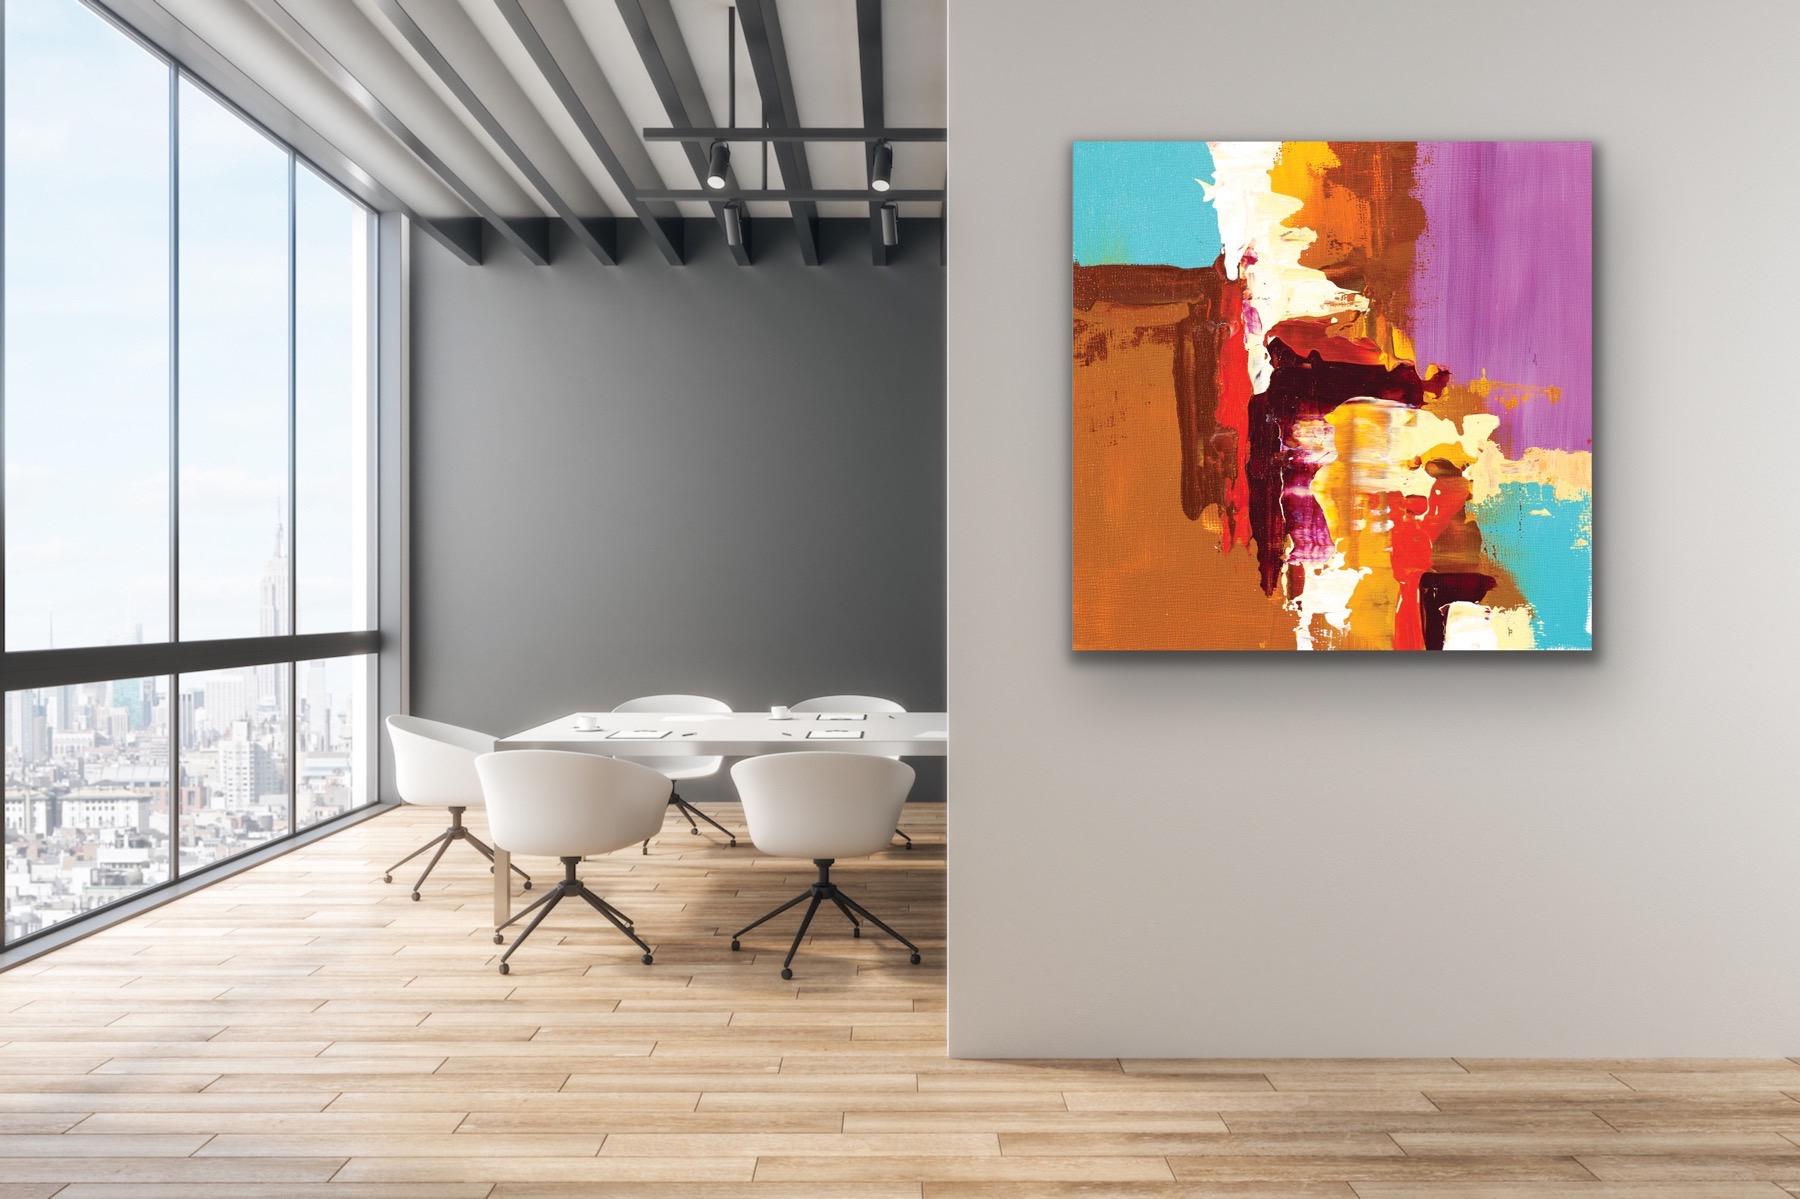 This contemporary modern abstract painting is printed on a lightweight metal composite and comes ready to hang. This vibrant composition can be hung both indoor and outdoor as it is weather resistant.

-Artist: Celeste Reiter
-Open Edition - Signed